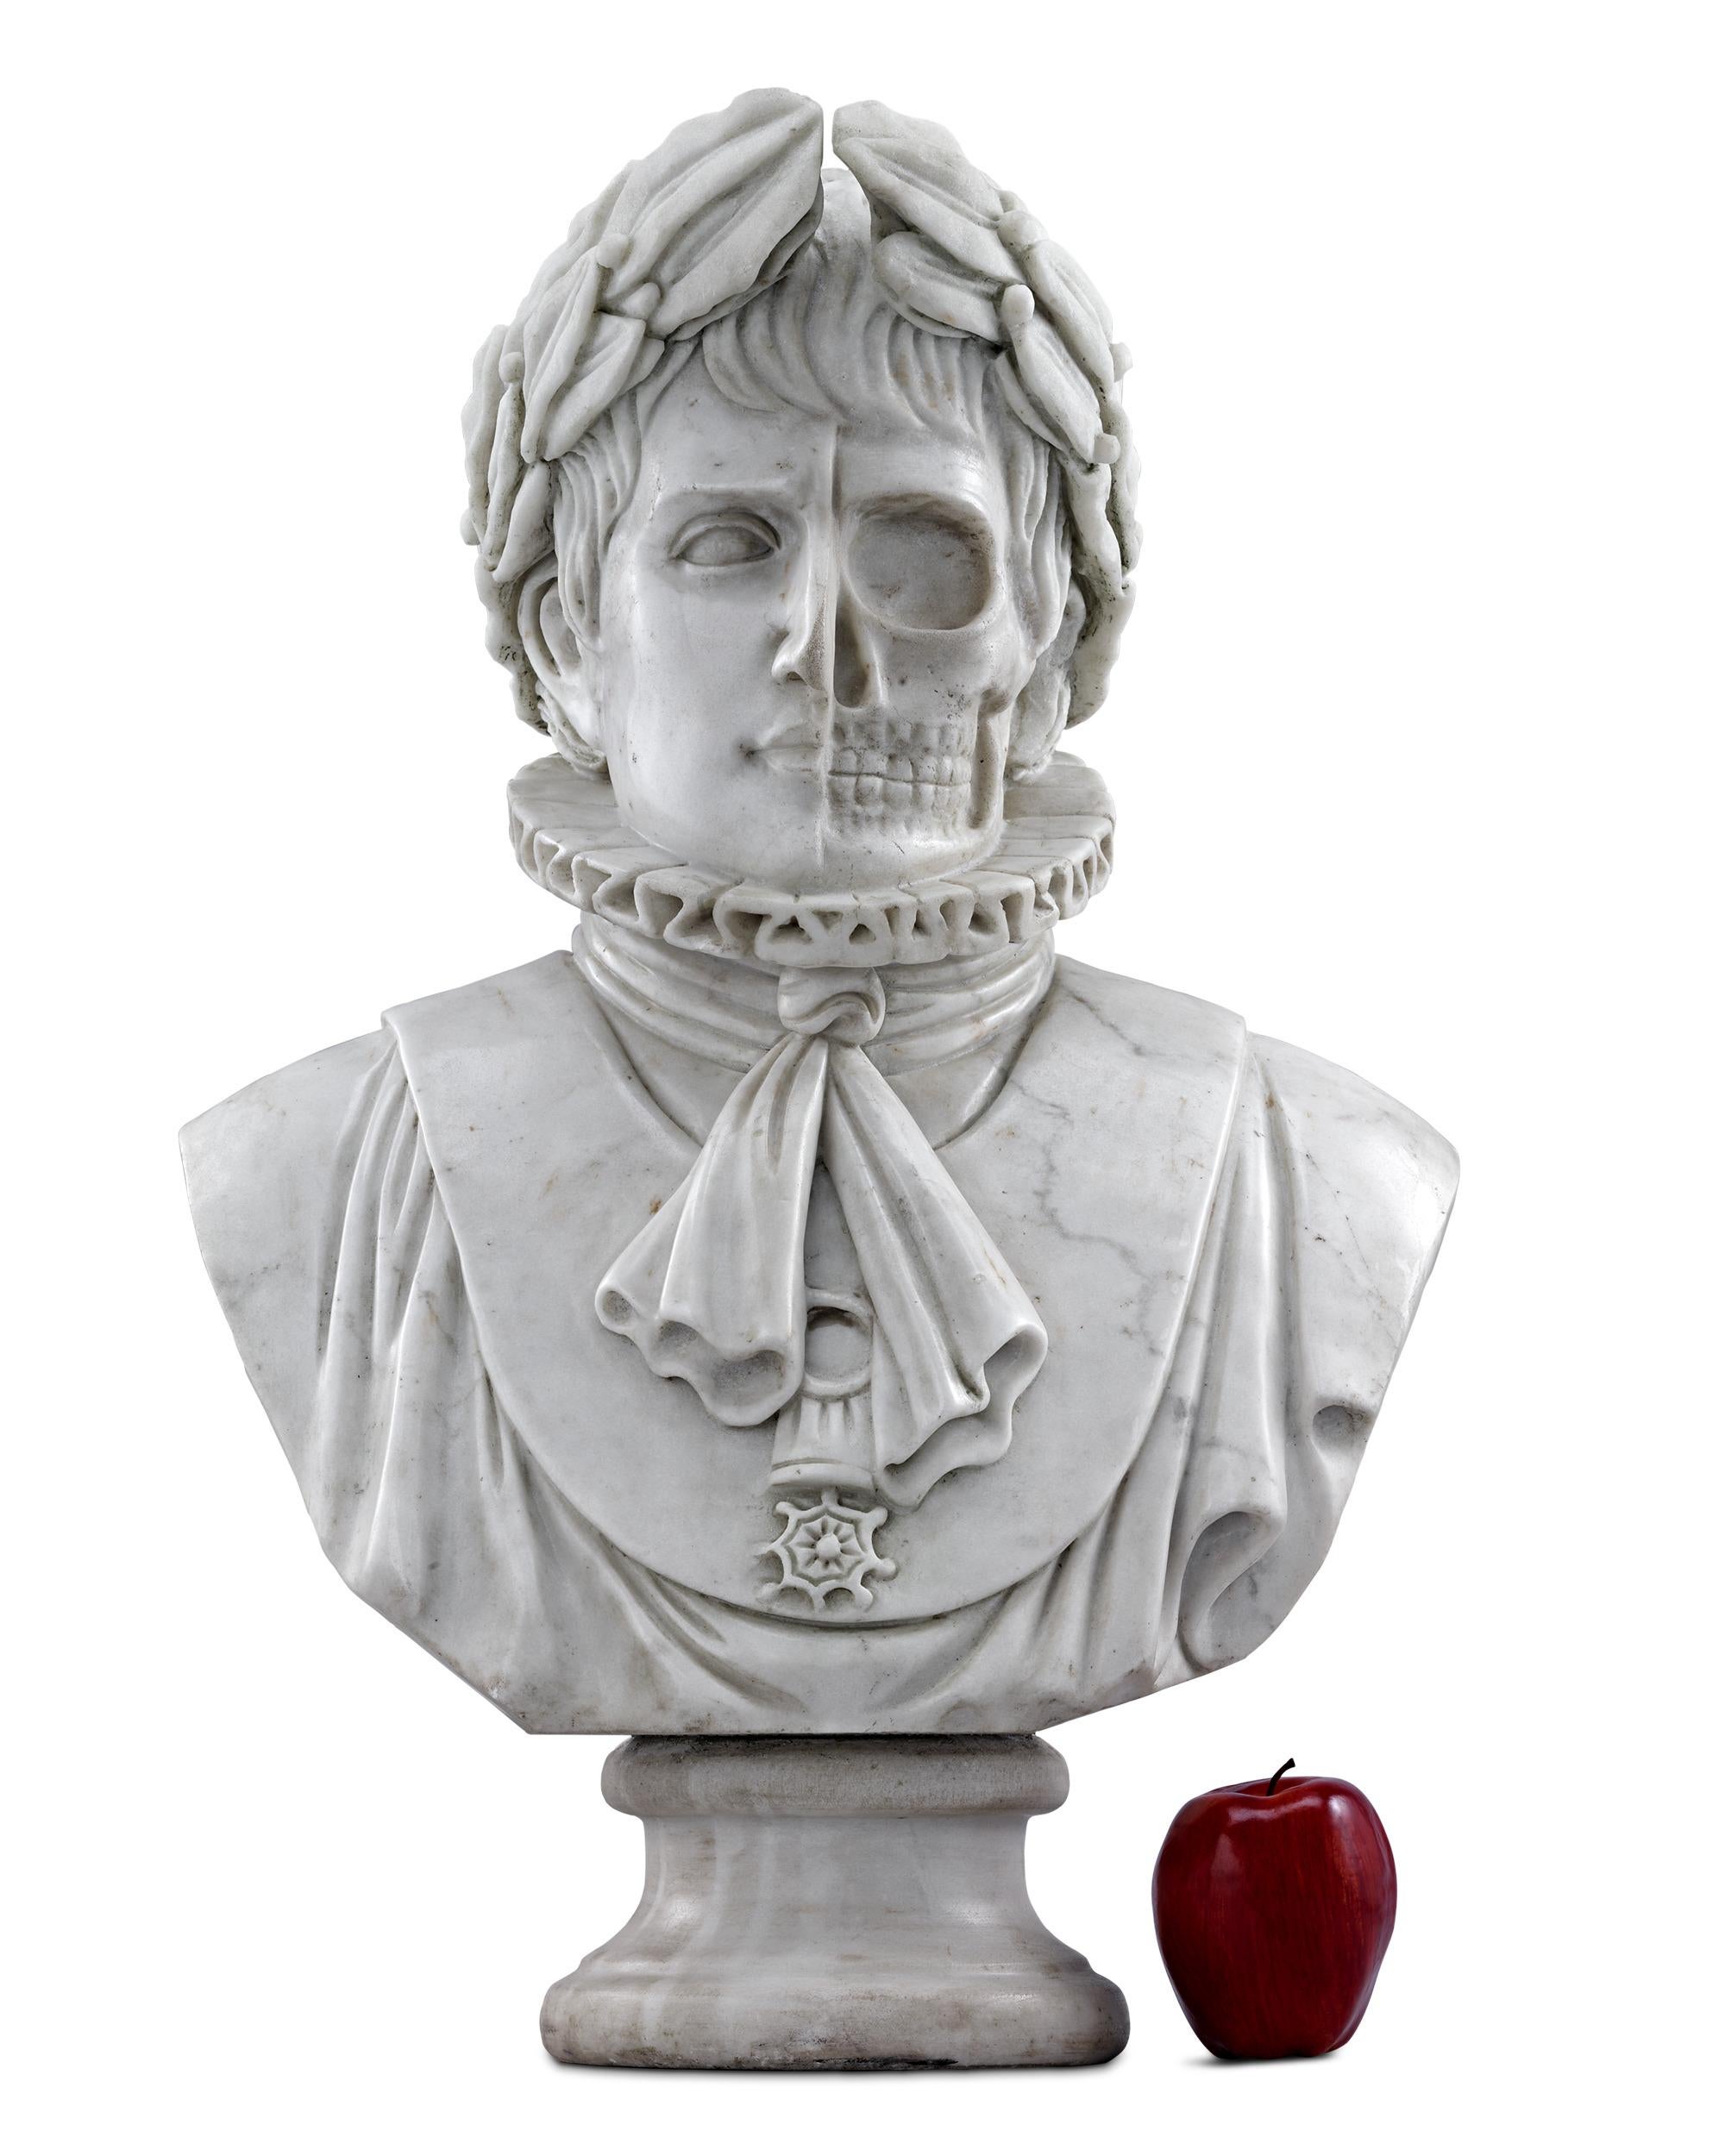 Sculpture of Napoleon in Life and Death 2